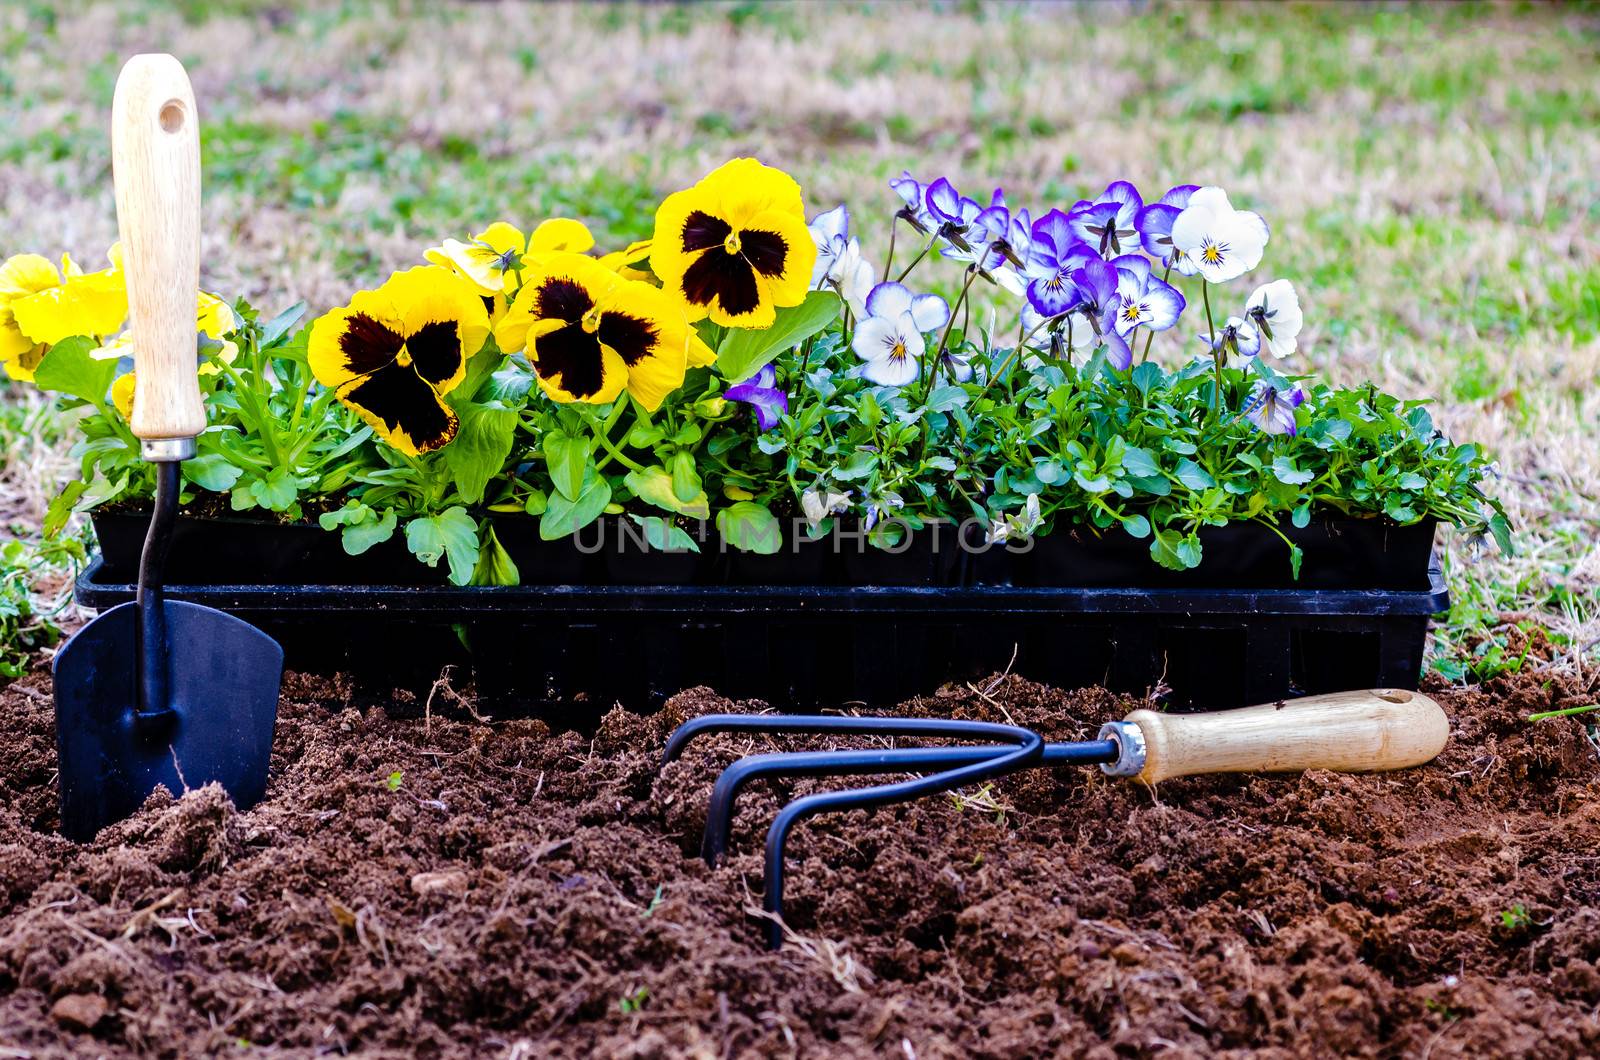 Planting flowers.  Pansies and violas in pots on cultivated soil with trowel and cultivator.